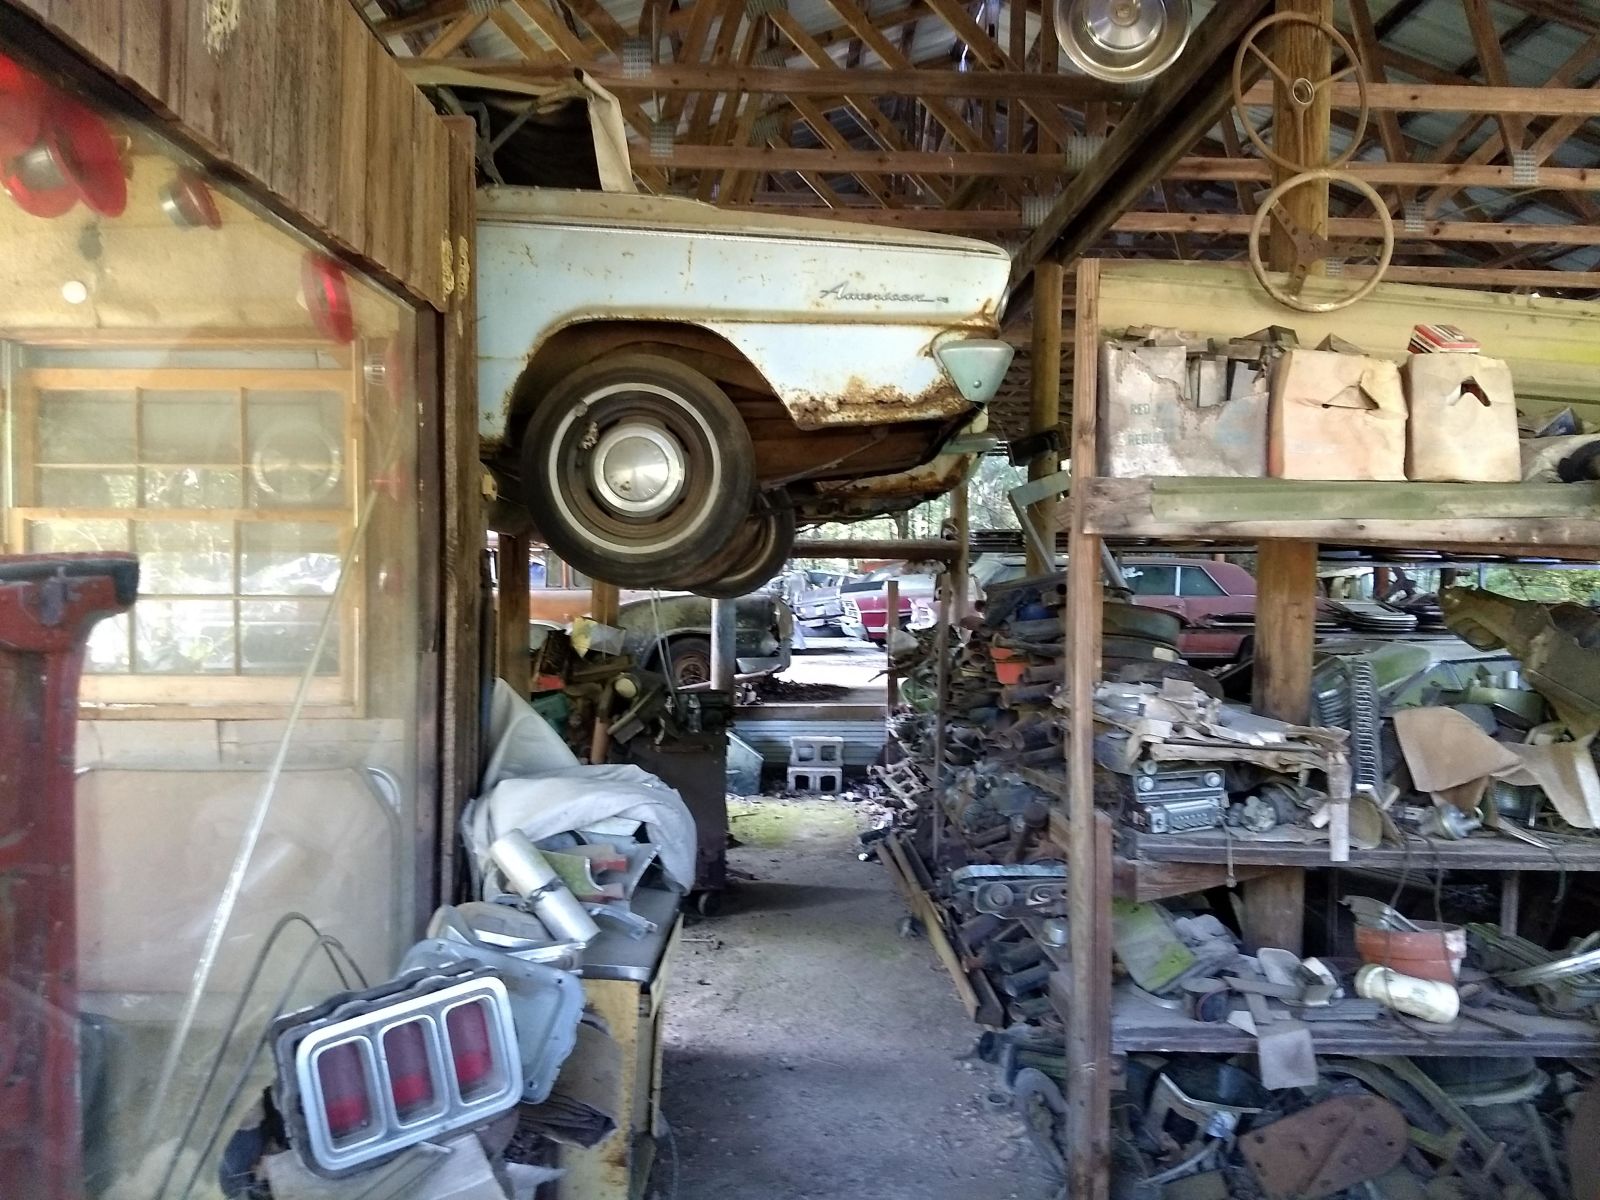 The old office at Old Car City USA. Stacks of car parts are left behind on the shelves from the site’s former career as a junkyard. Of particular interest are the old fashioned AM radios and instrument clusters. 